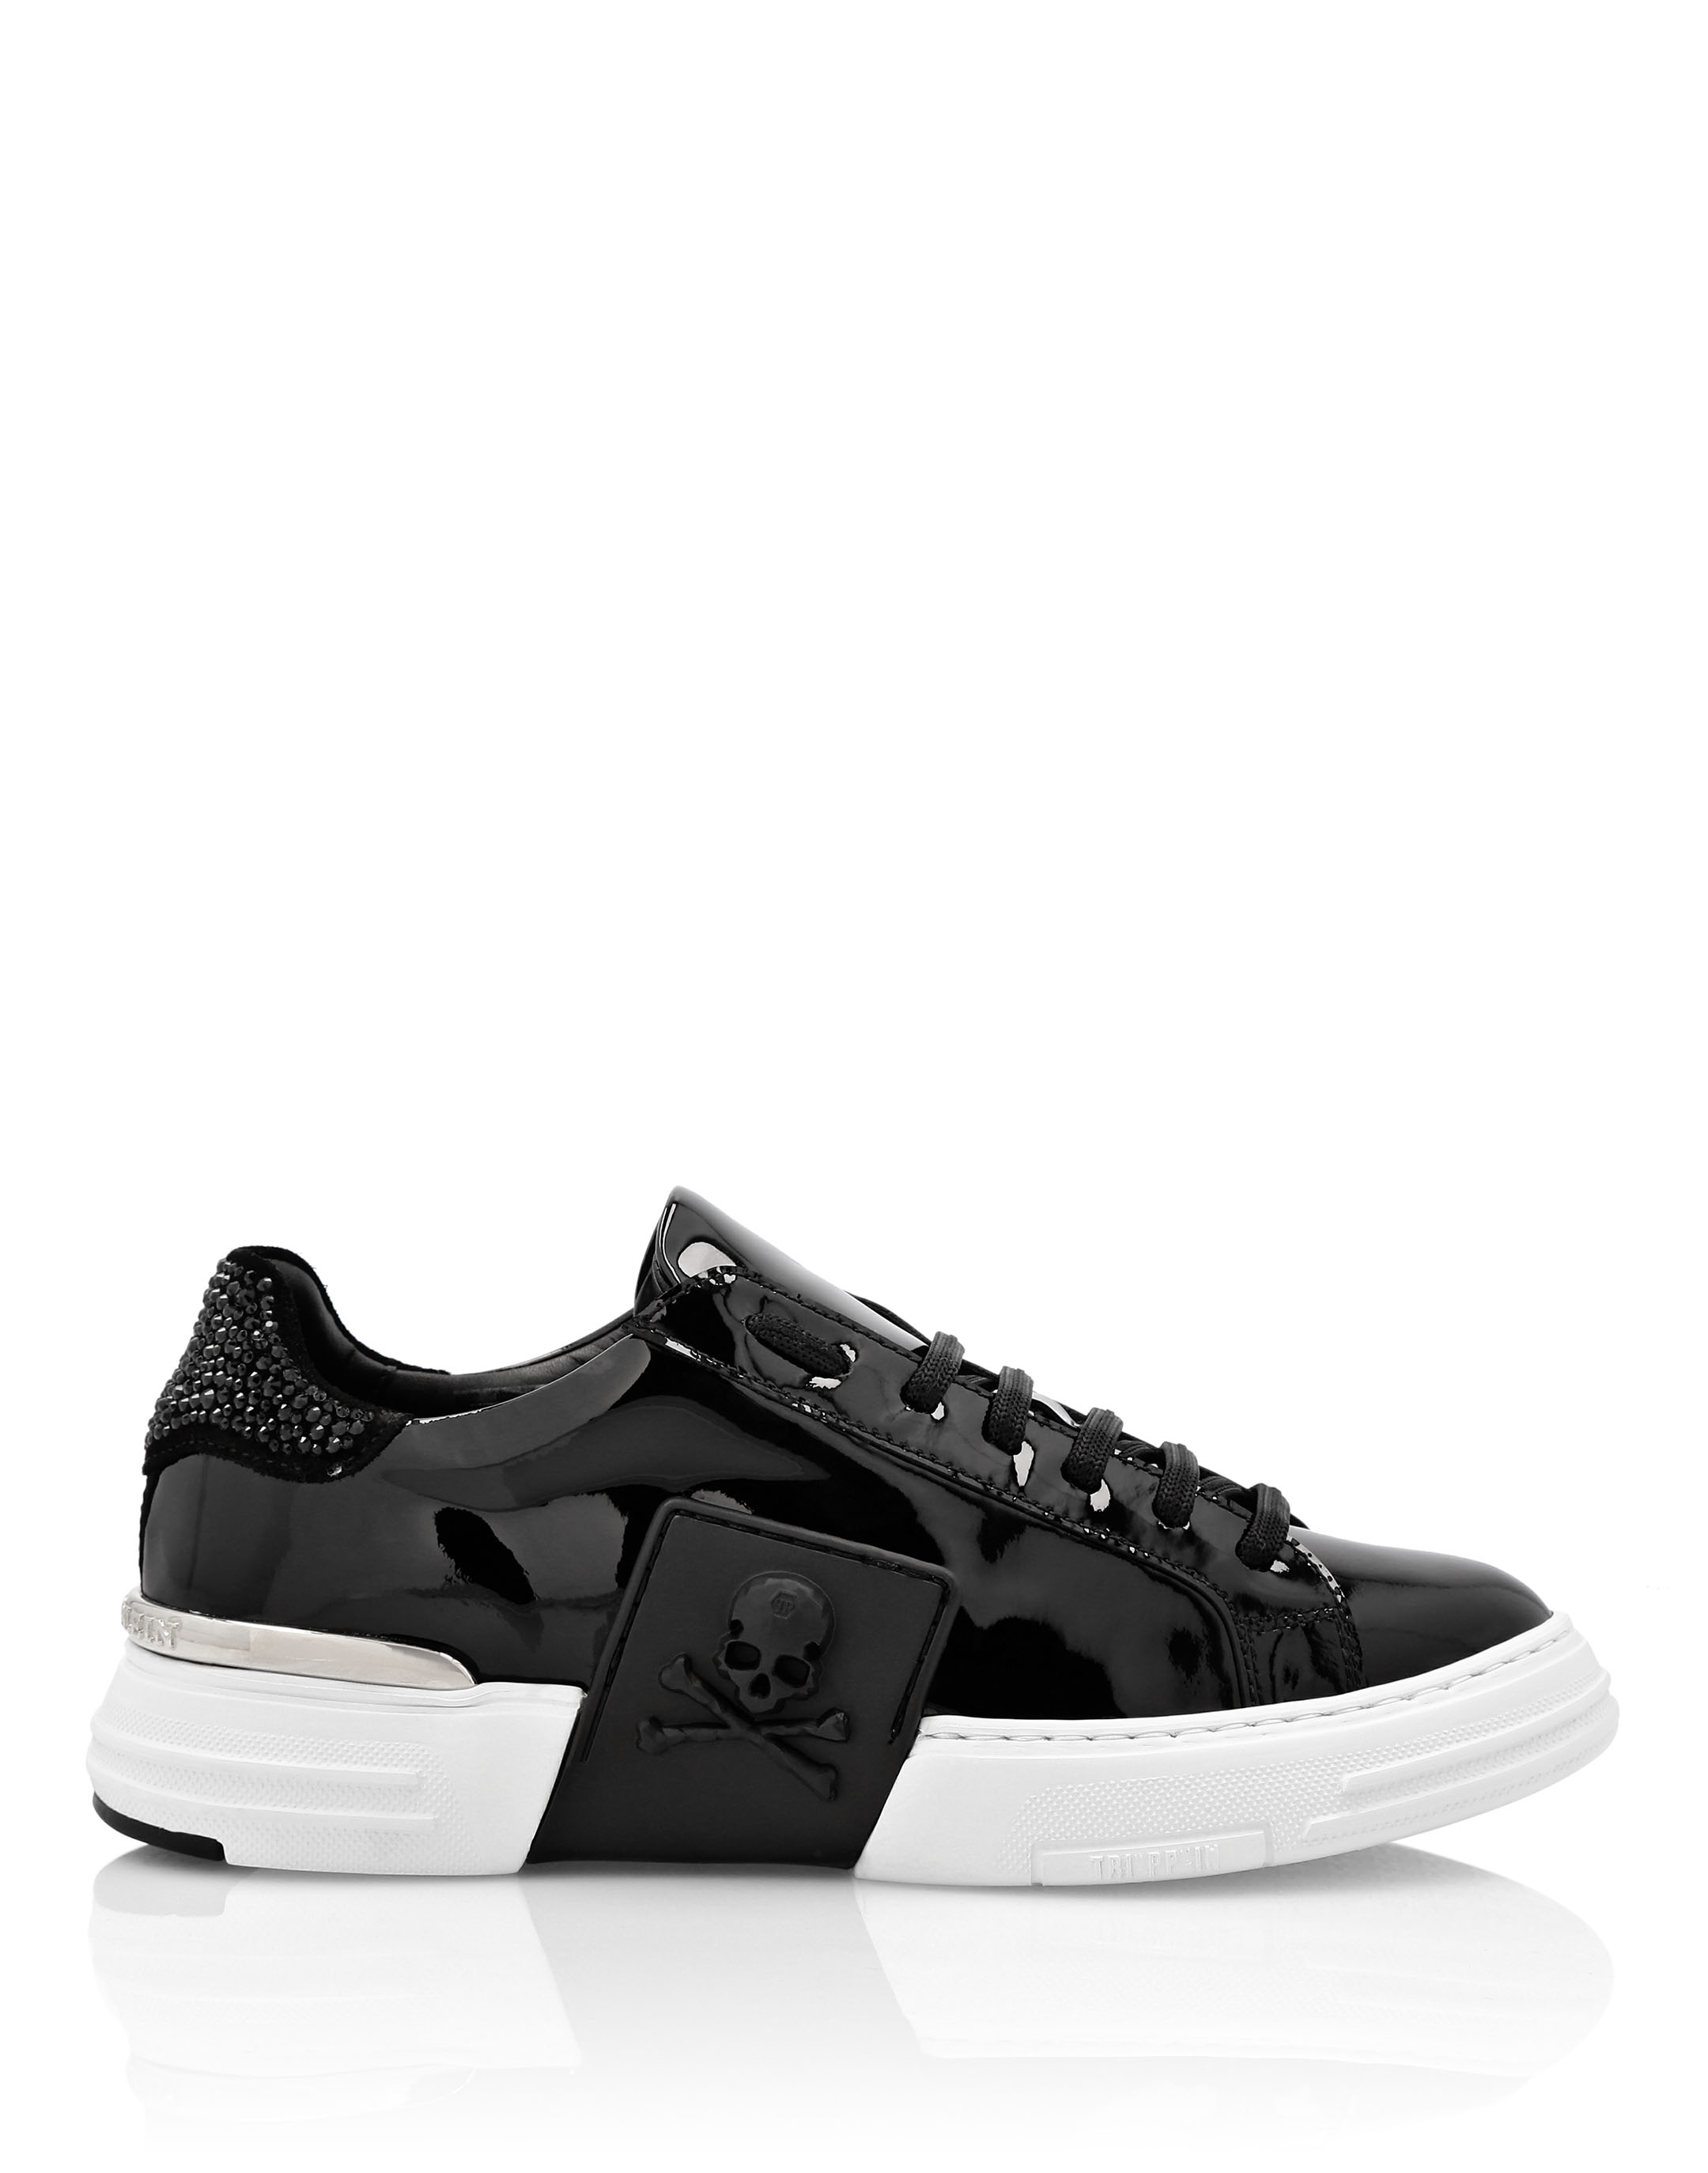 Lo-Top Patent Leather Sneakers Skull